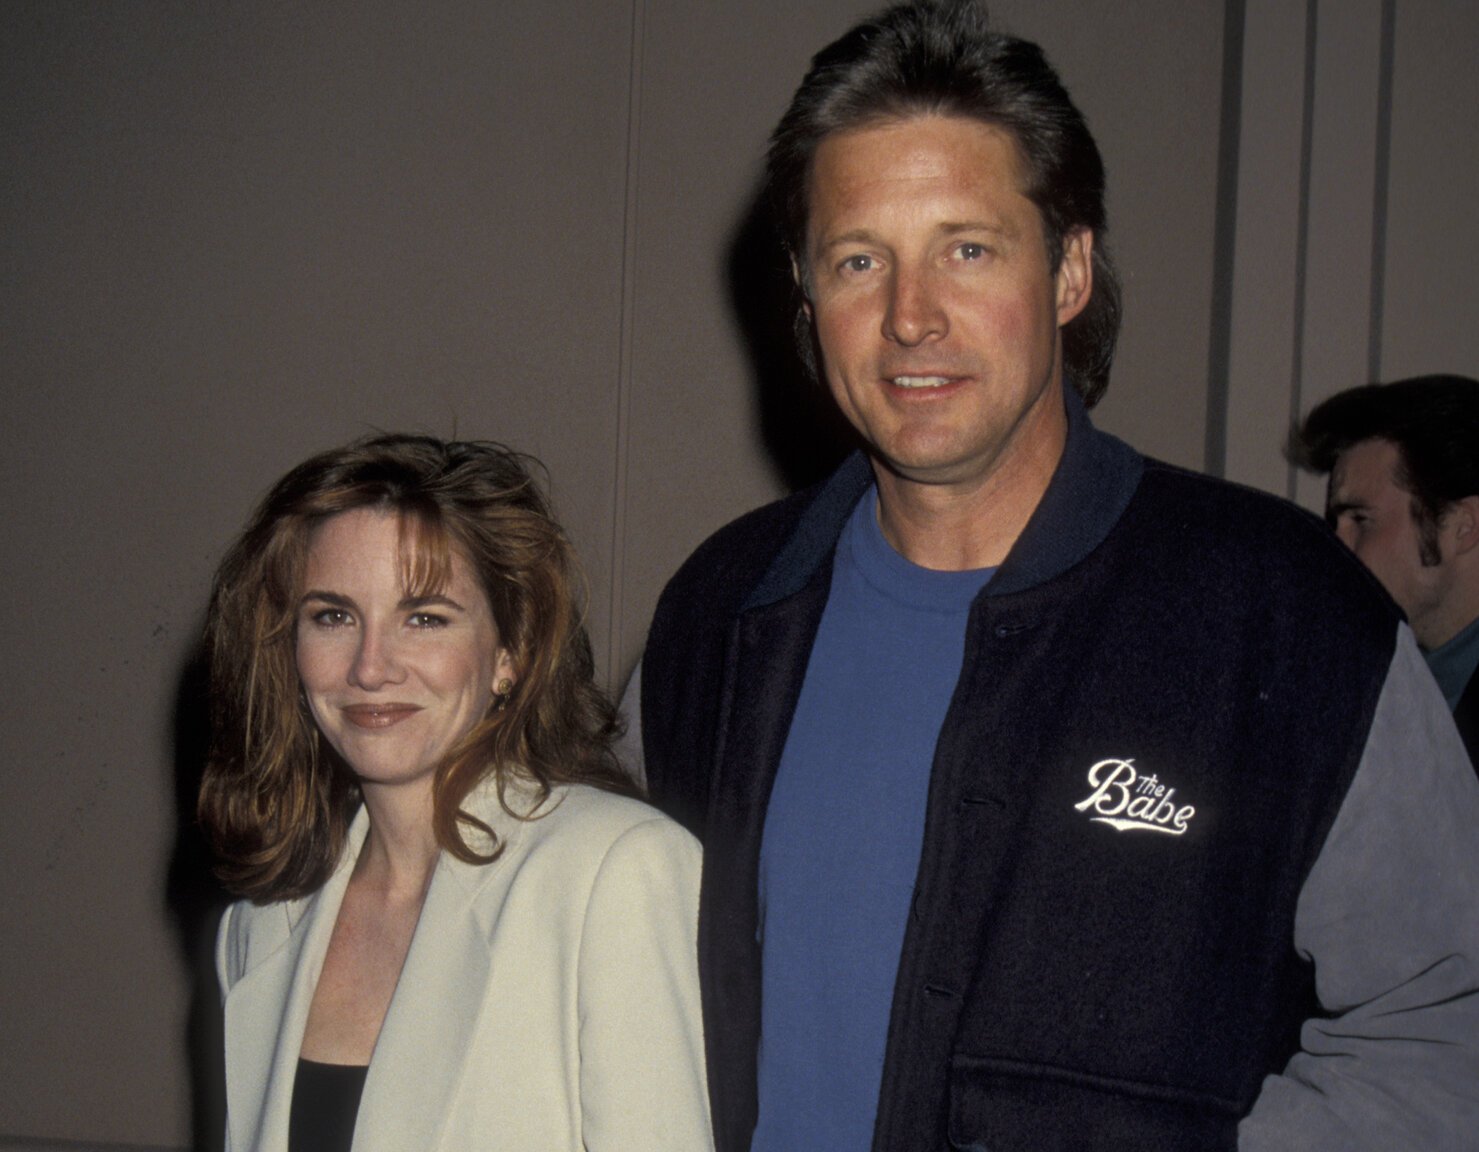 Melissa Gilbert and Bruce Boxleitner at the "Fallen Champ: The Untold Story of Mike Tyson" Los Angeles screening in 1992.